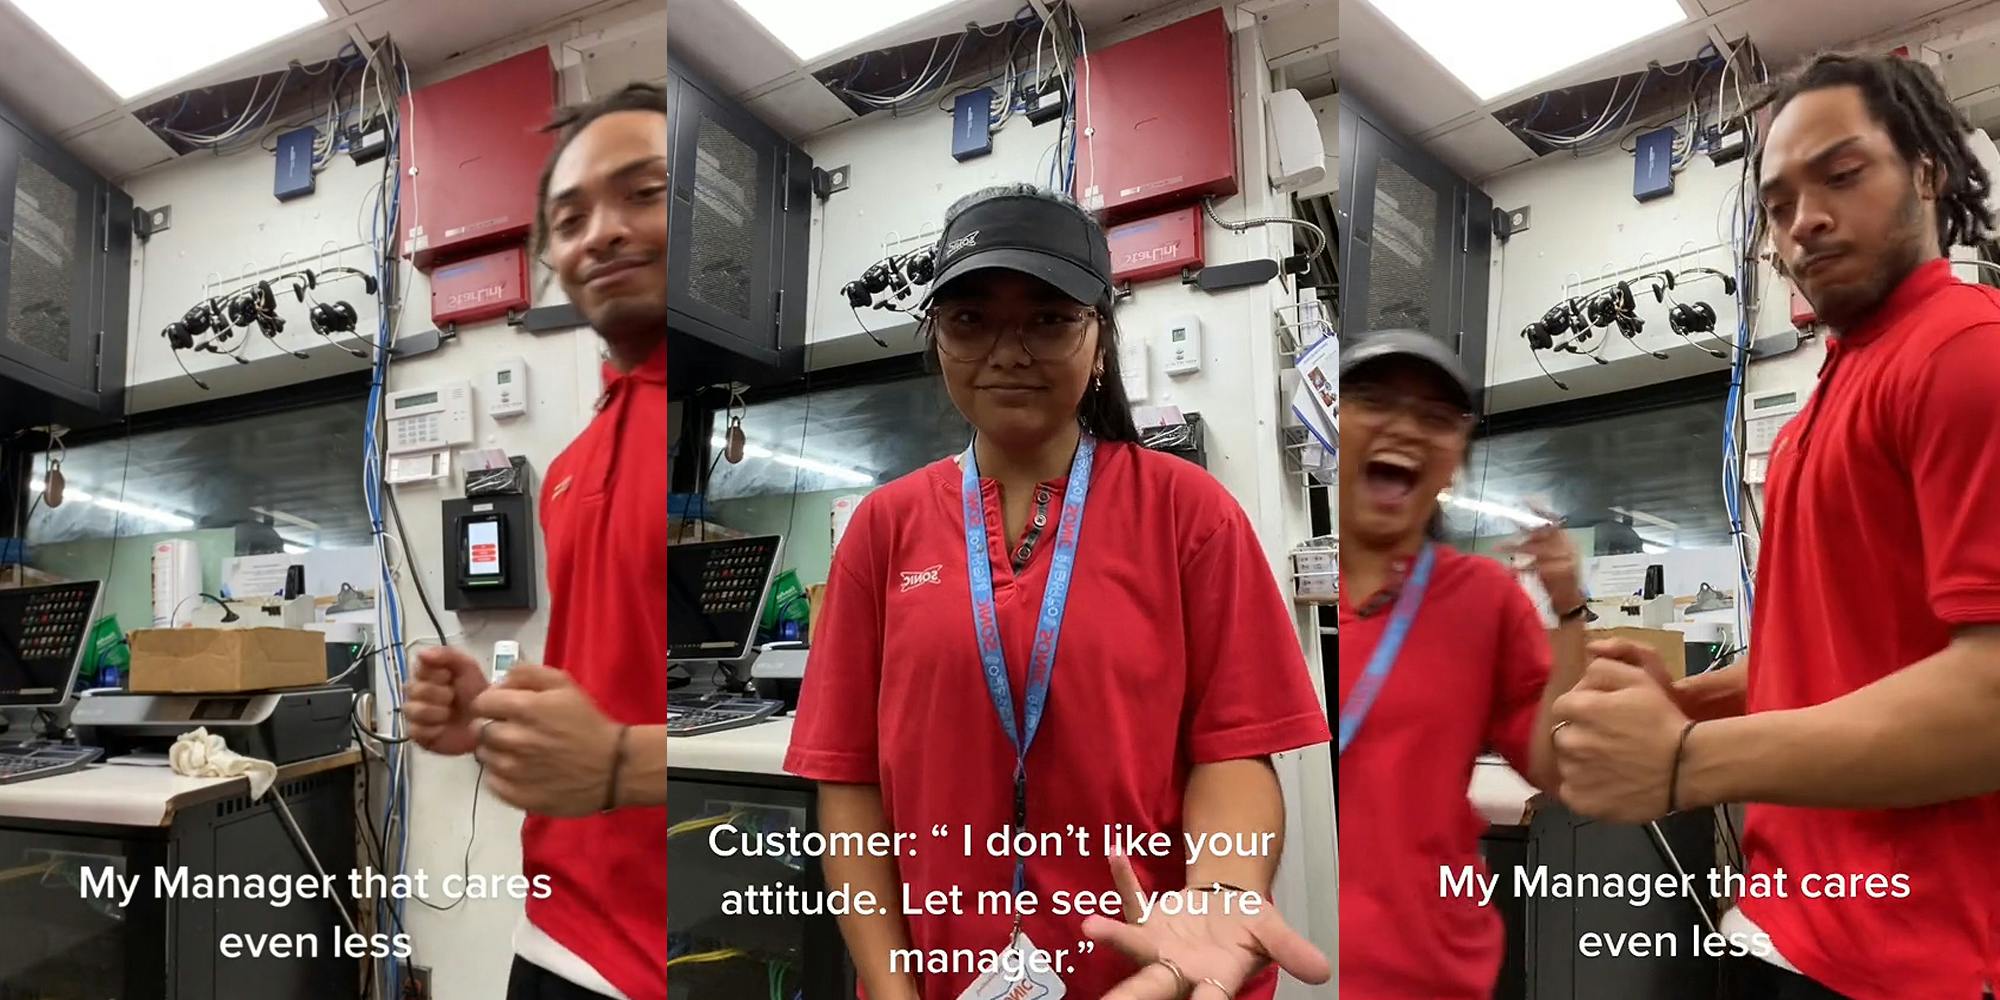 Sonic manager dancing into room caption "My Manager that cares even less" (l) Sonic employee with hand out caption "Customer: "I don't like your attitude. Let me see your manager."" (c) Sonic employee and manager dancing caption "My Manager that cares even less" (r)